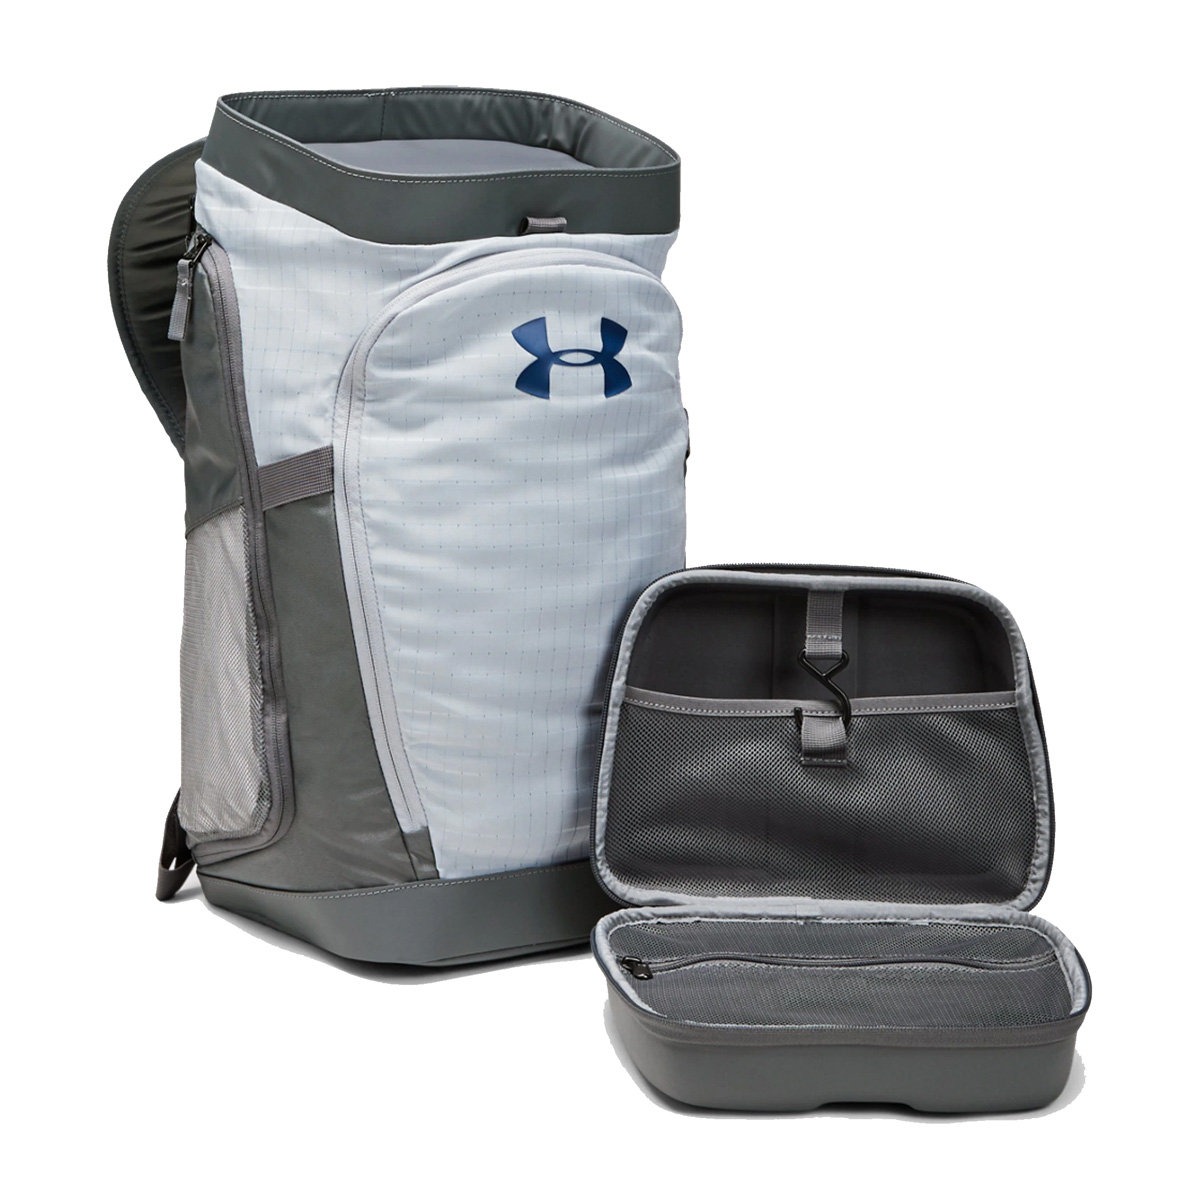 Under Armour Own The Gym Duffle Bag 